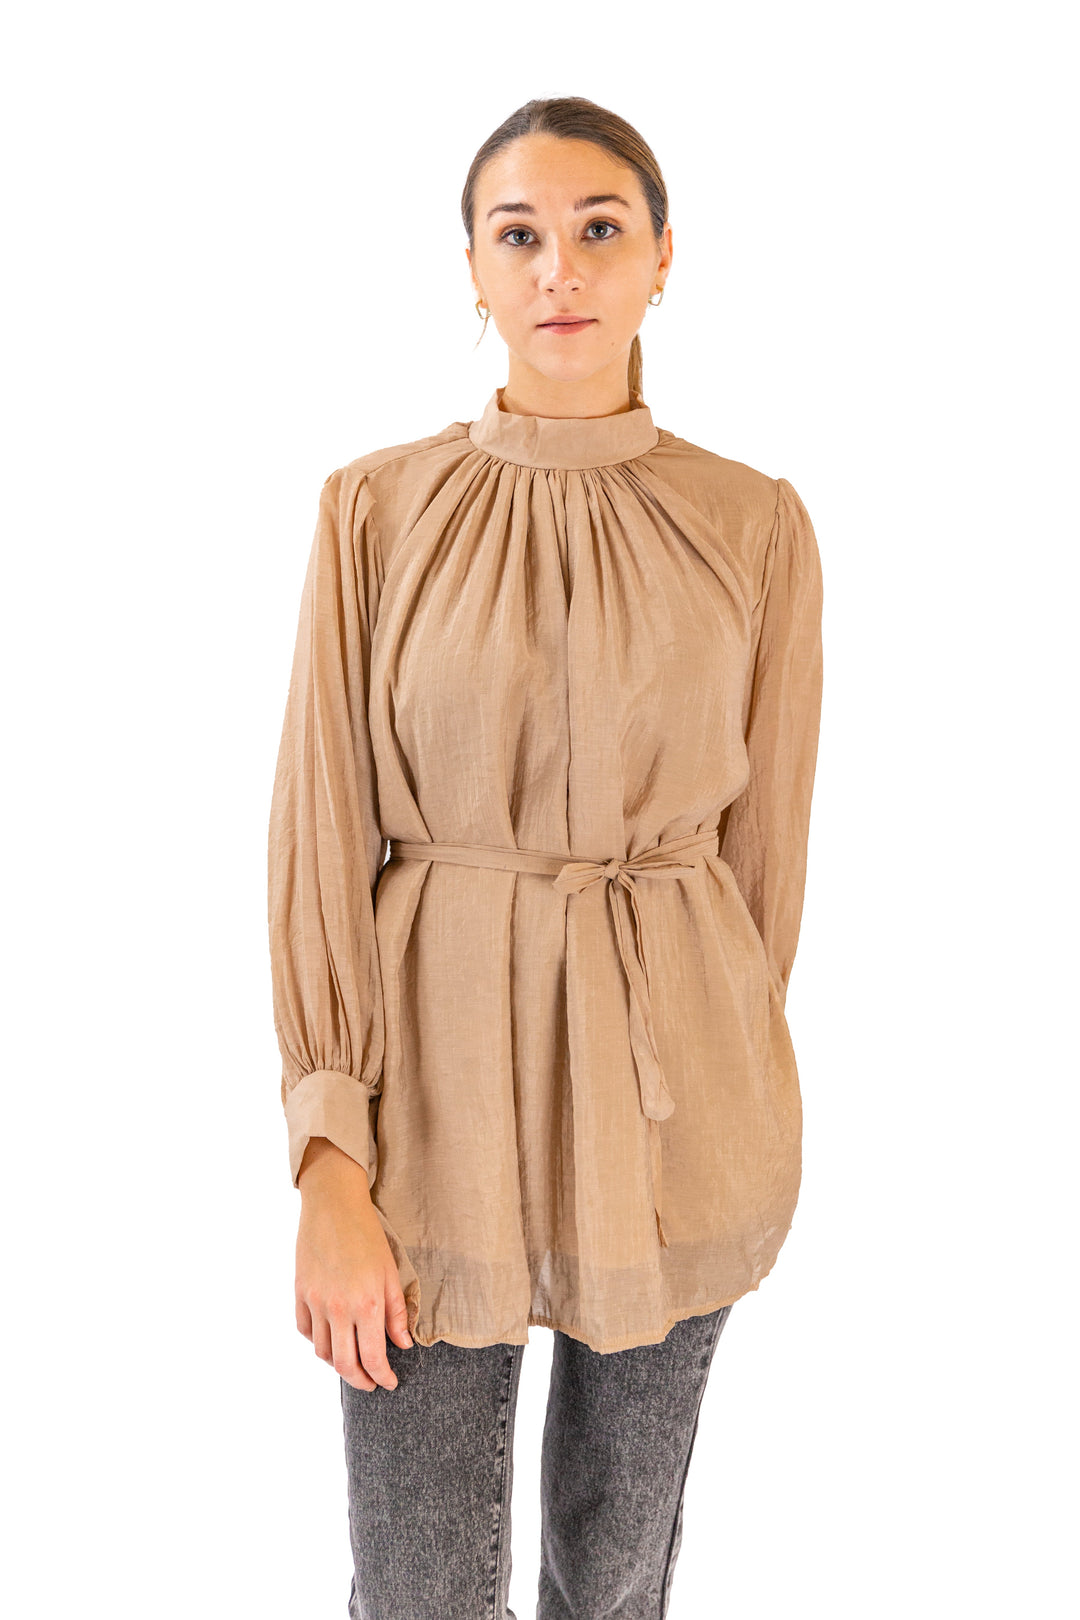 Fabonics Elegant Mocha Tie-Waist Blouse with Stylish Gathered Neck in Rich Brown